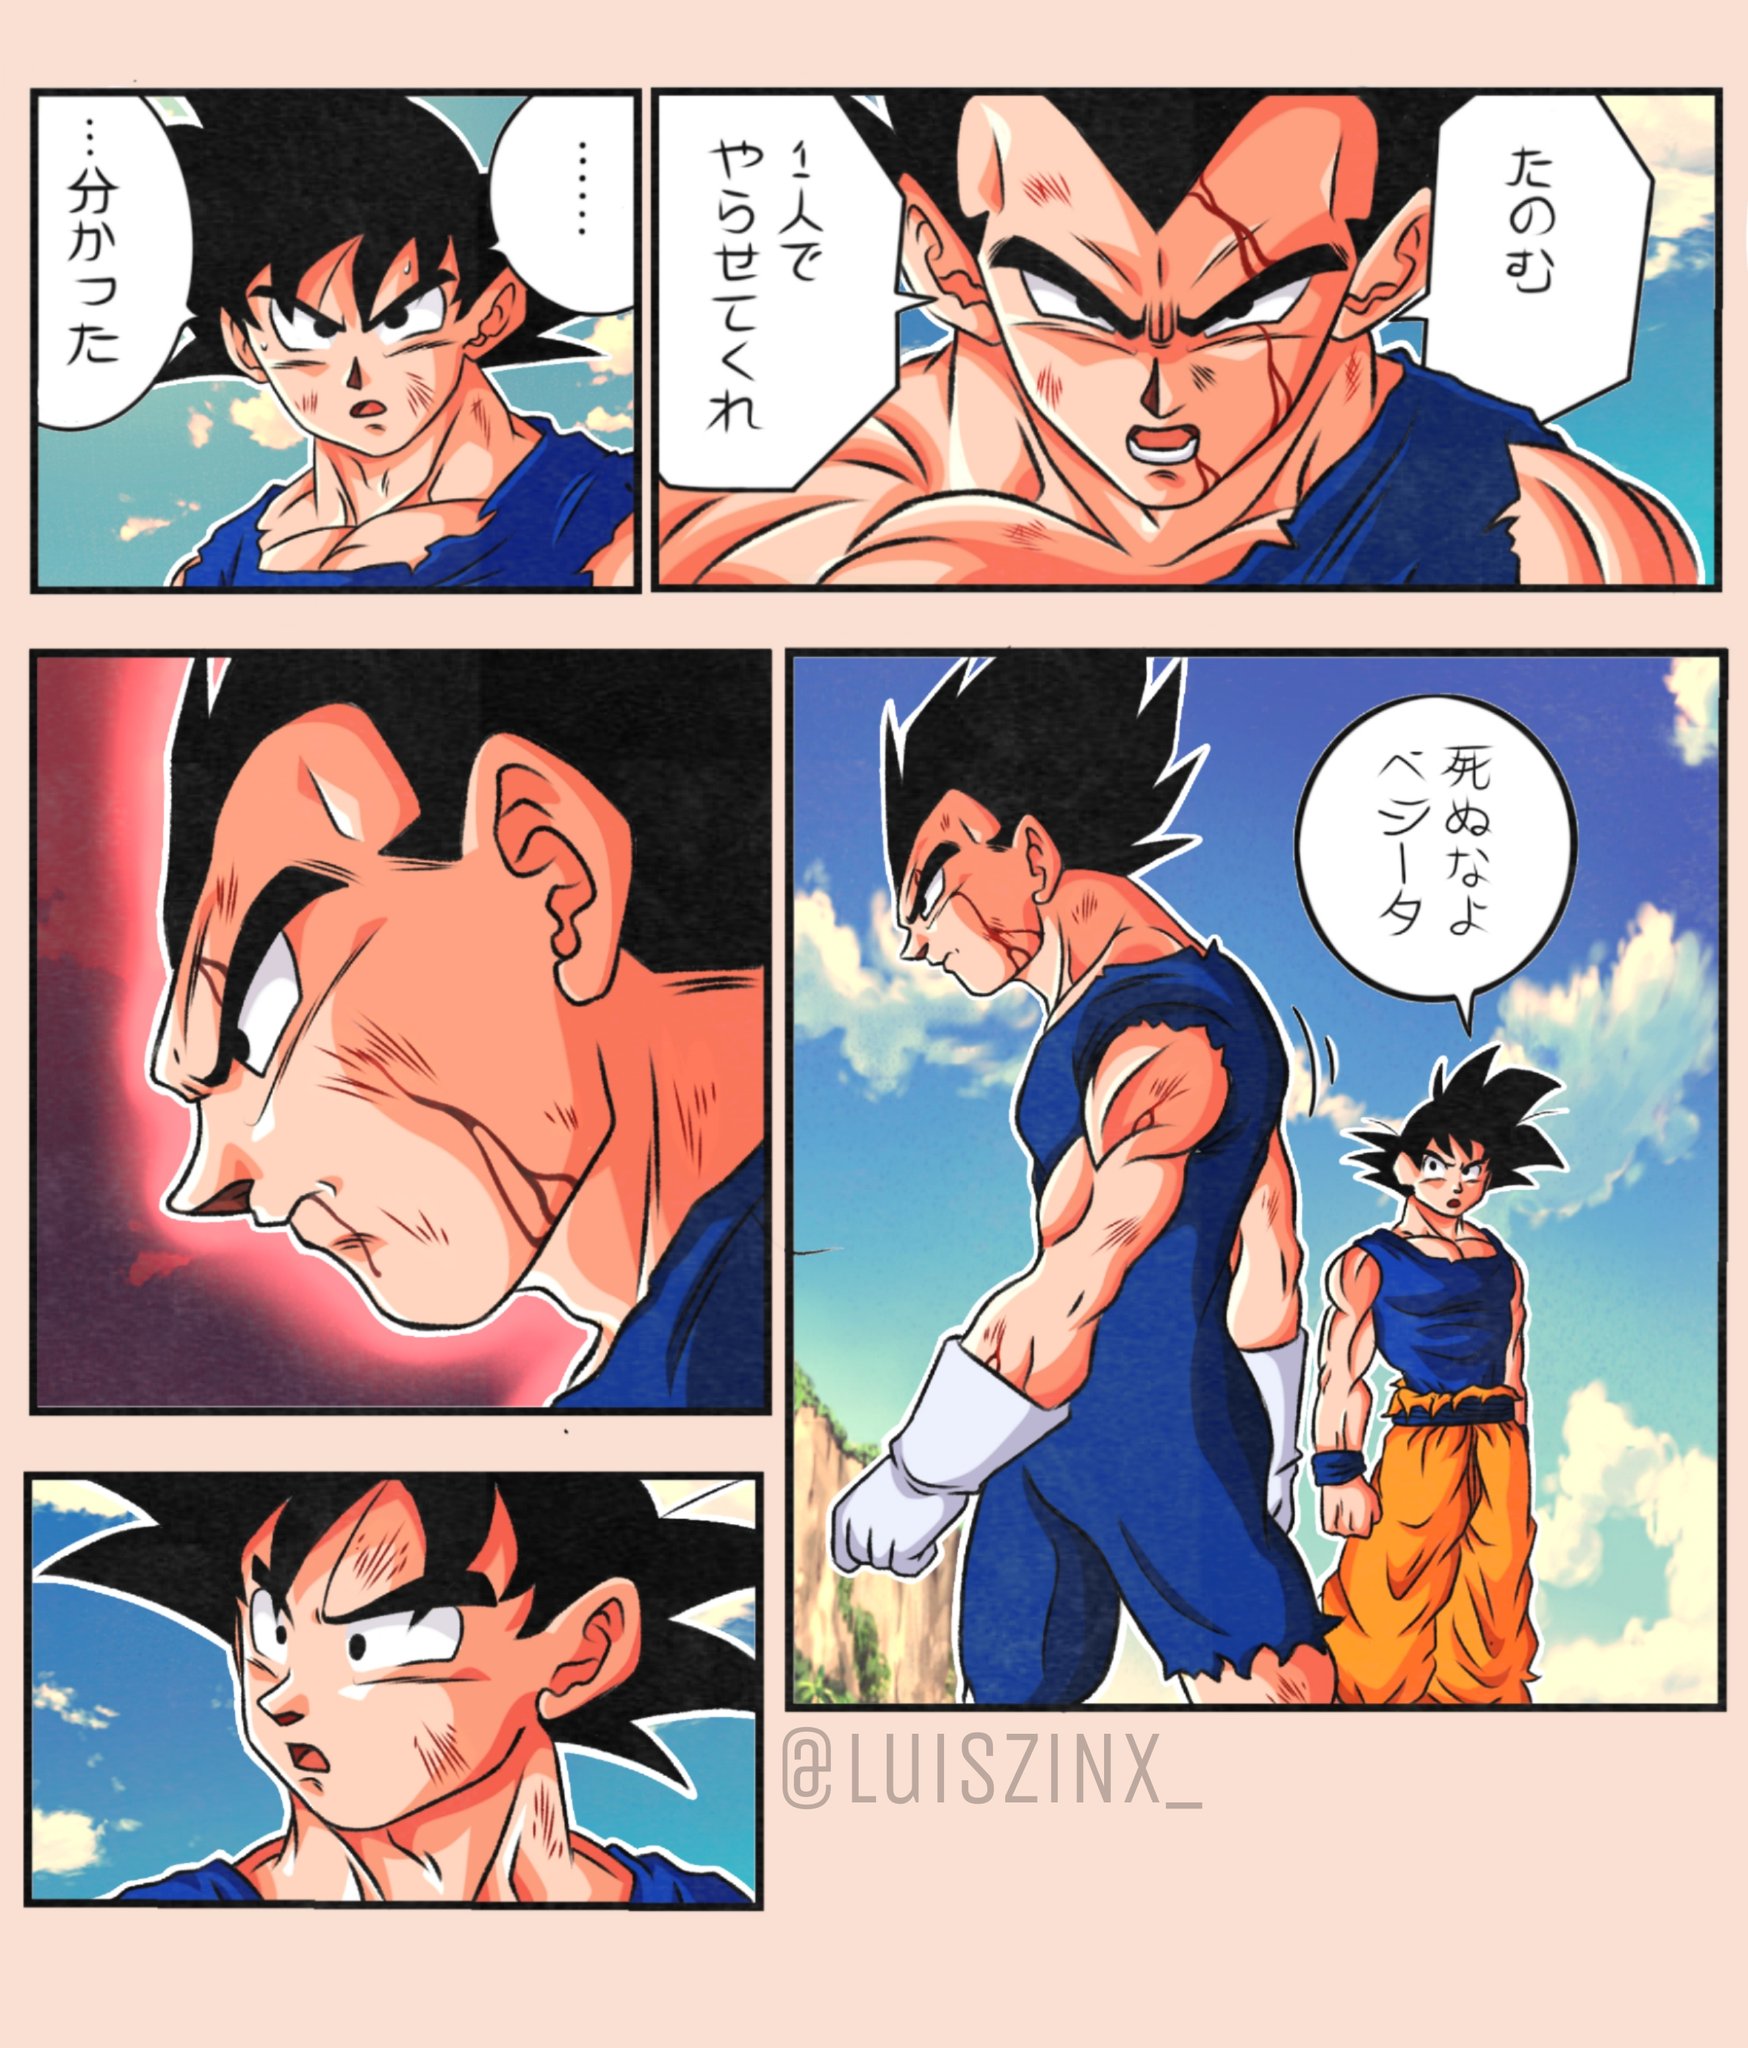 I Colored A DragonBall Super Manga Page, Let Me Know What You Guys